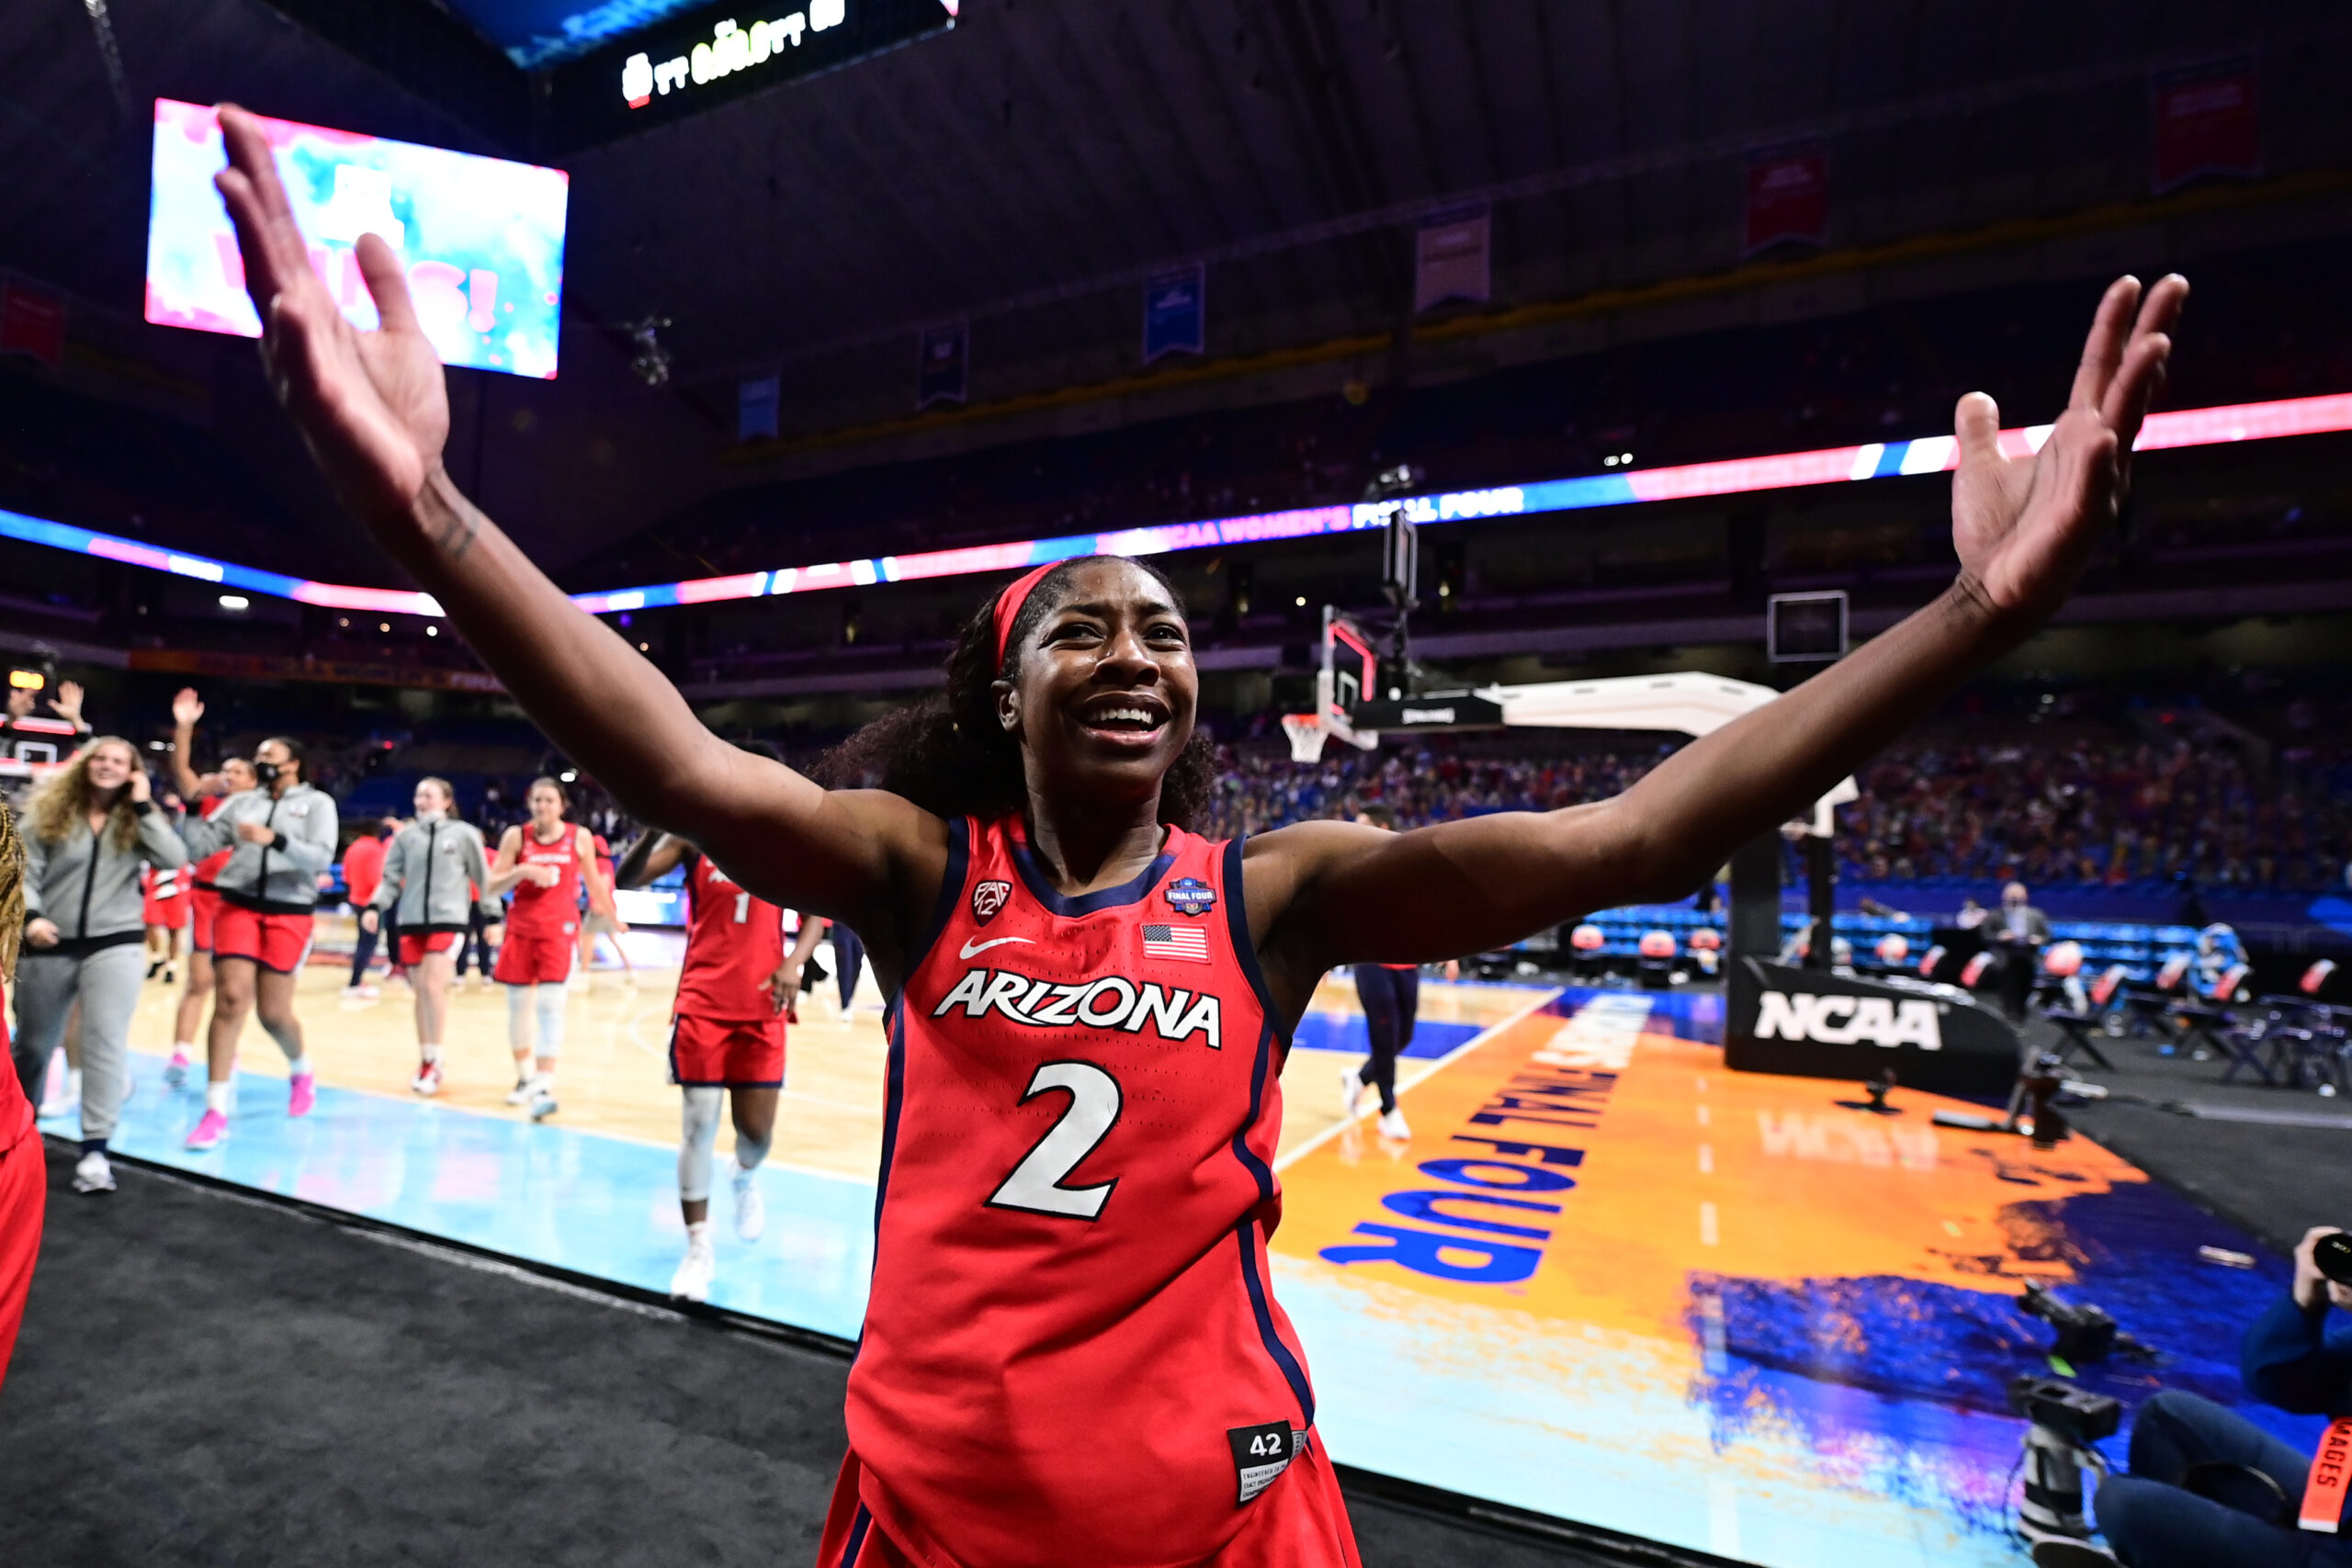 SAN ANTONIO, TX - APRIL 2: Aari McDonald #2 of the Arizona Wildcats celebrate their win over the Connecticut Huskies in the semifinals of the NCAA WomenÕs Basketball Tournament at Alamodome on April 2, 2021 in San Antonio, Texas. (Photo by Ben Solomon via Getty Images)